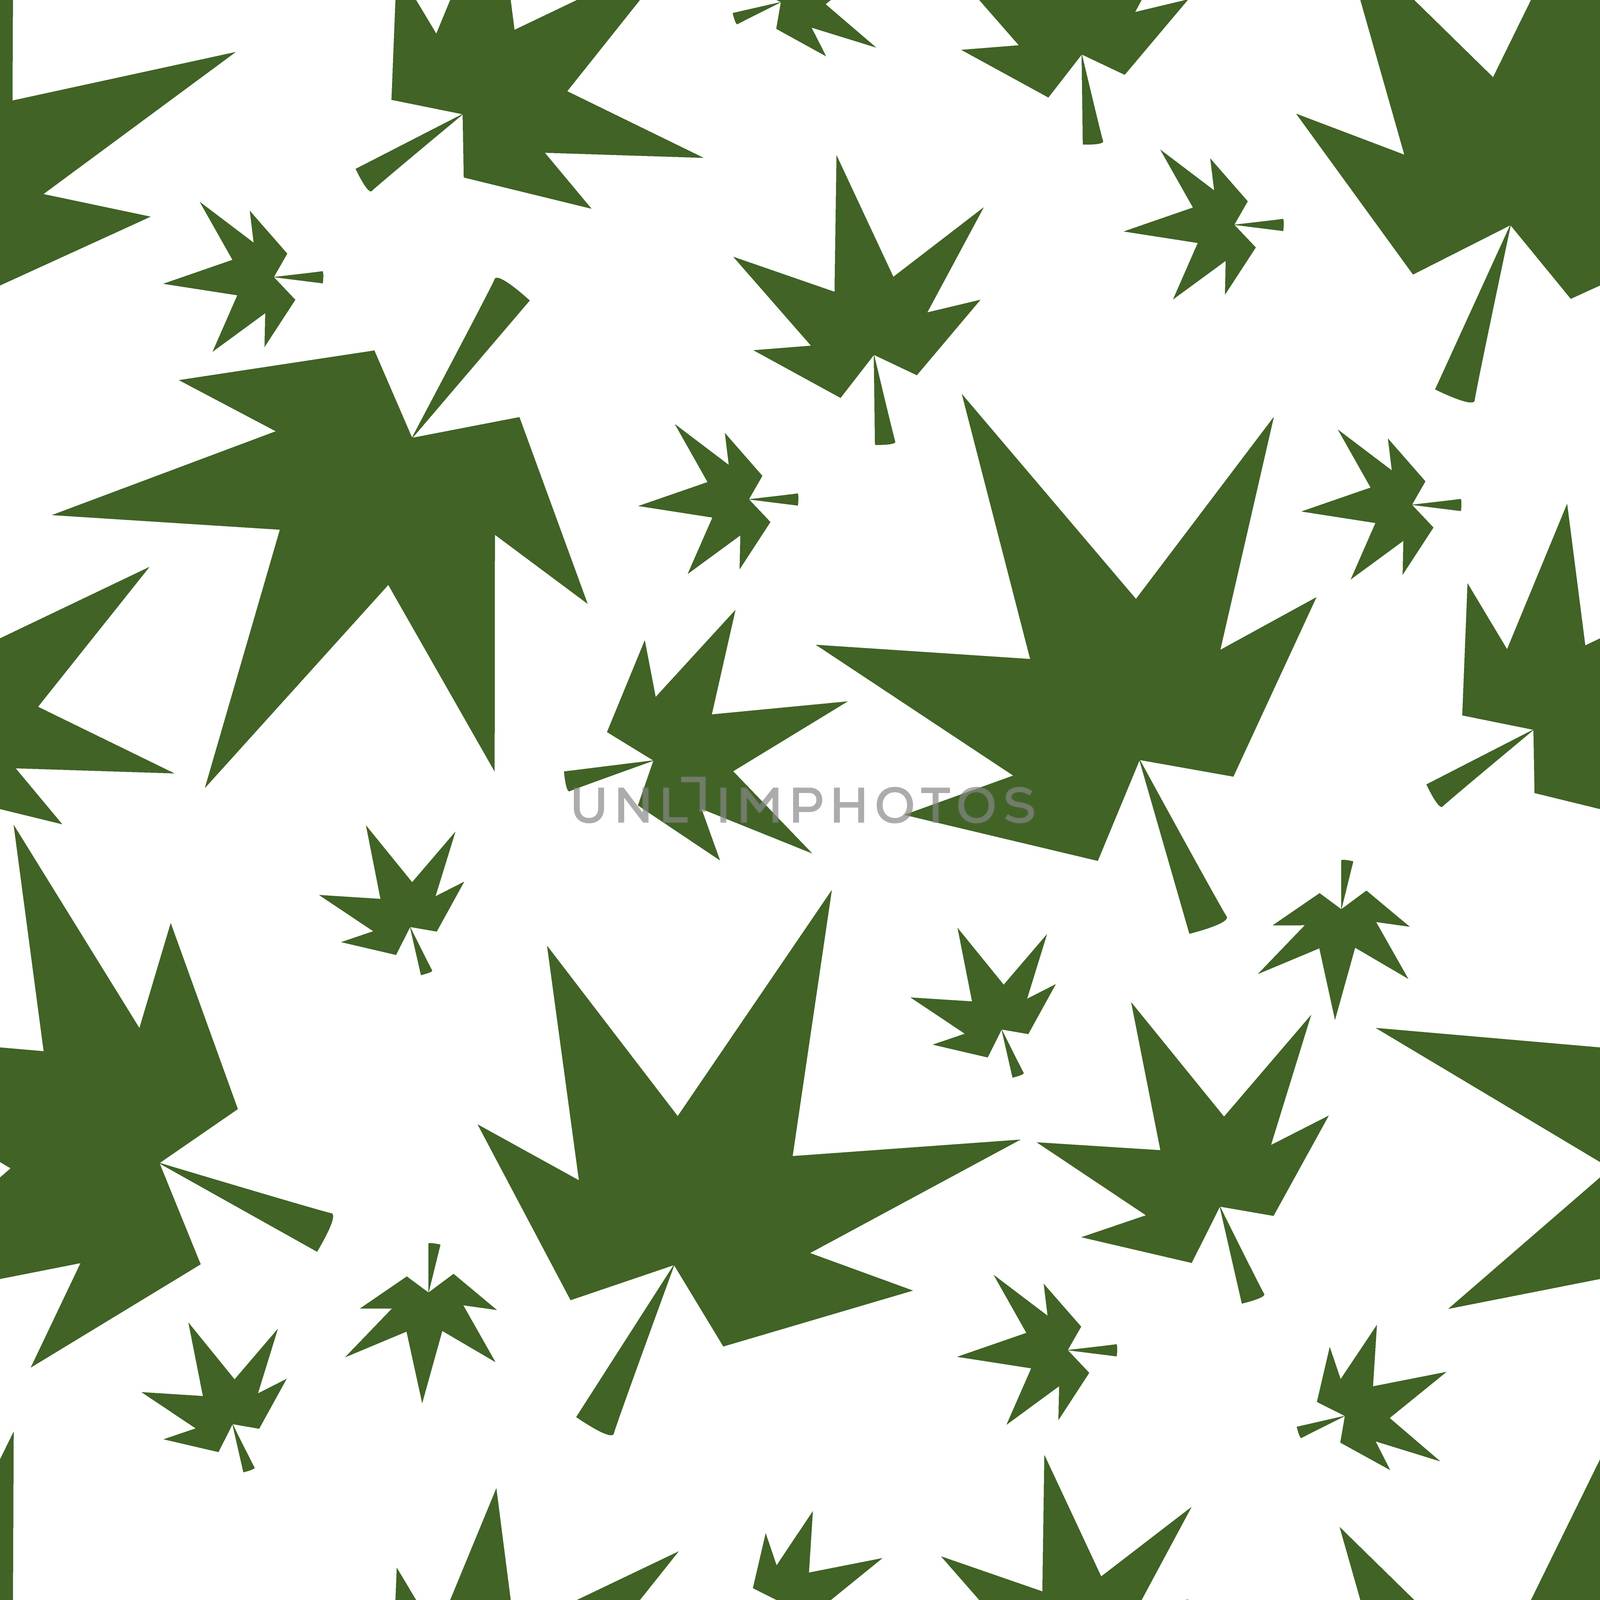 Autumn fall maple leaves seamless pattern background. Green on white. For fabric or textile or gift wrapping.